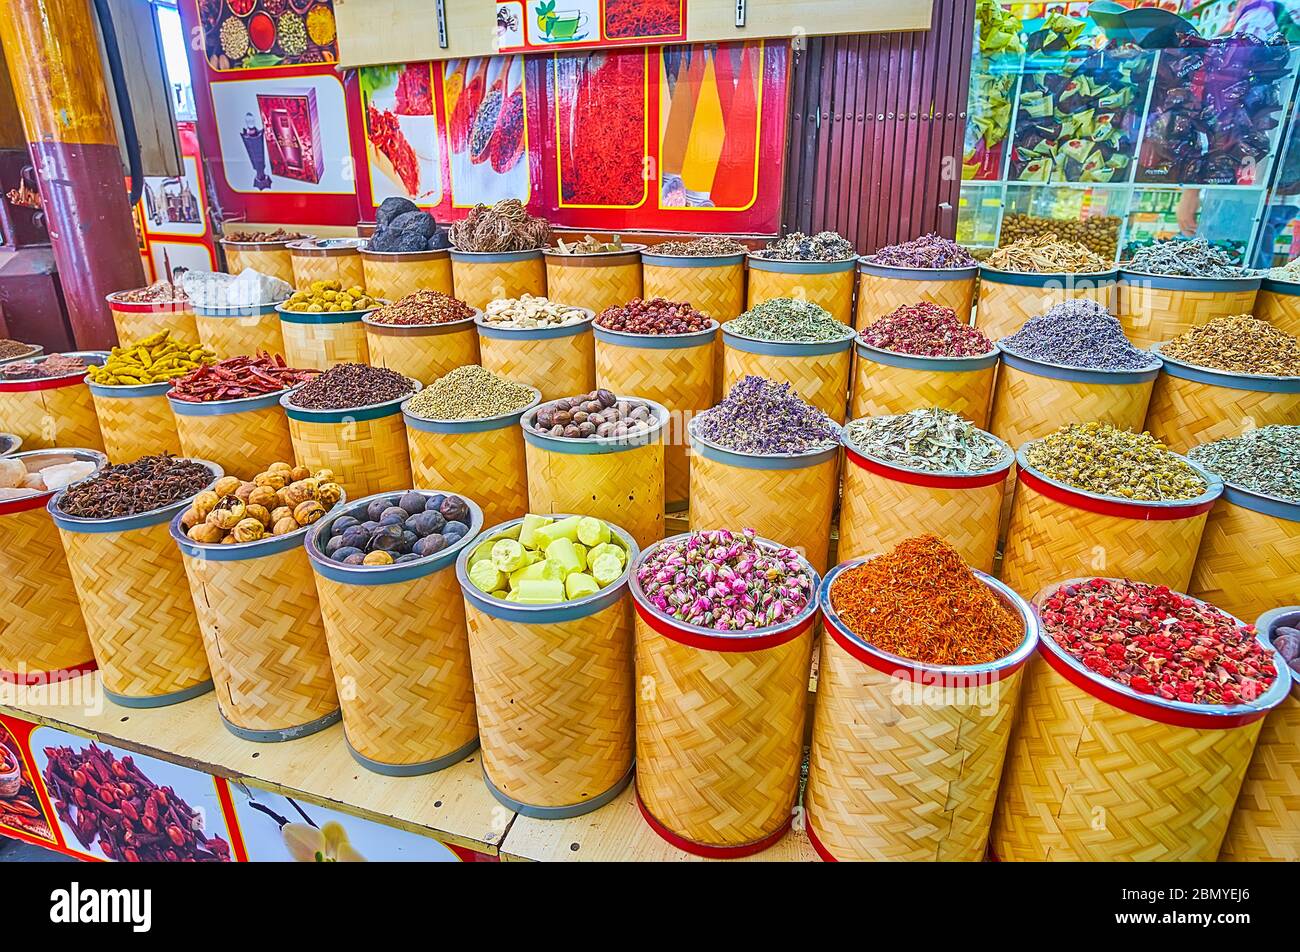 DUBAI, UAE - MARCH 2, 2020: The Spice Souq section of Grand Souq Deira is popular for wide range of spices, Eastern herbs, flower tea of petals, dried Stock Photo